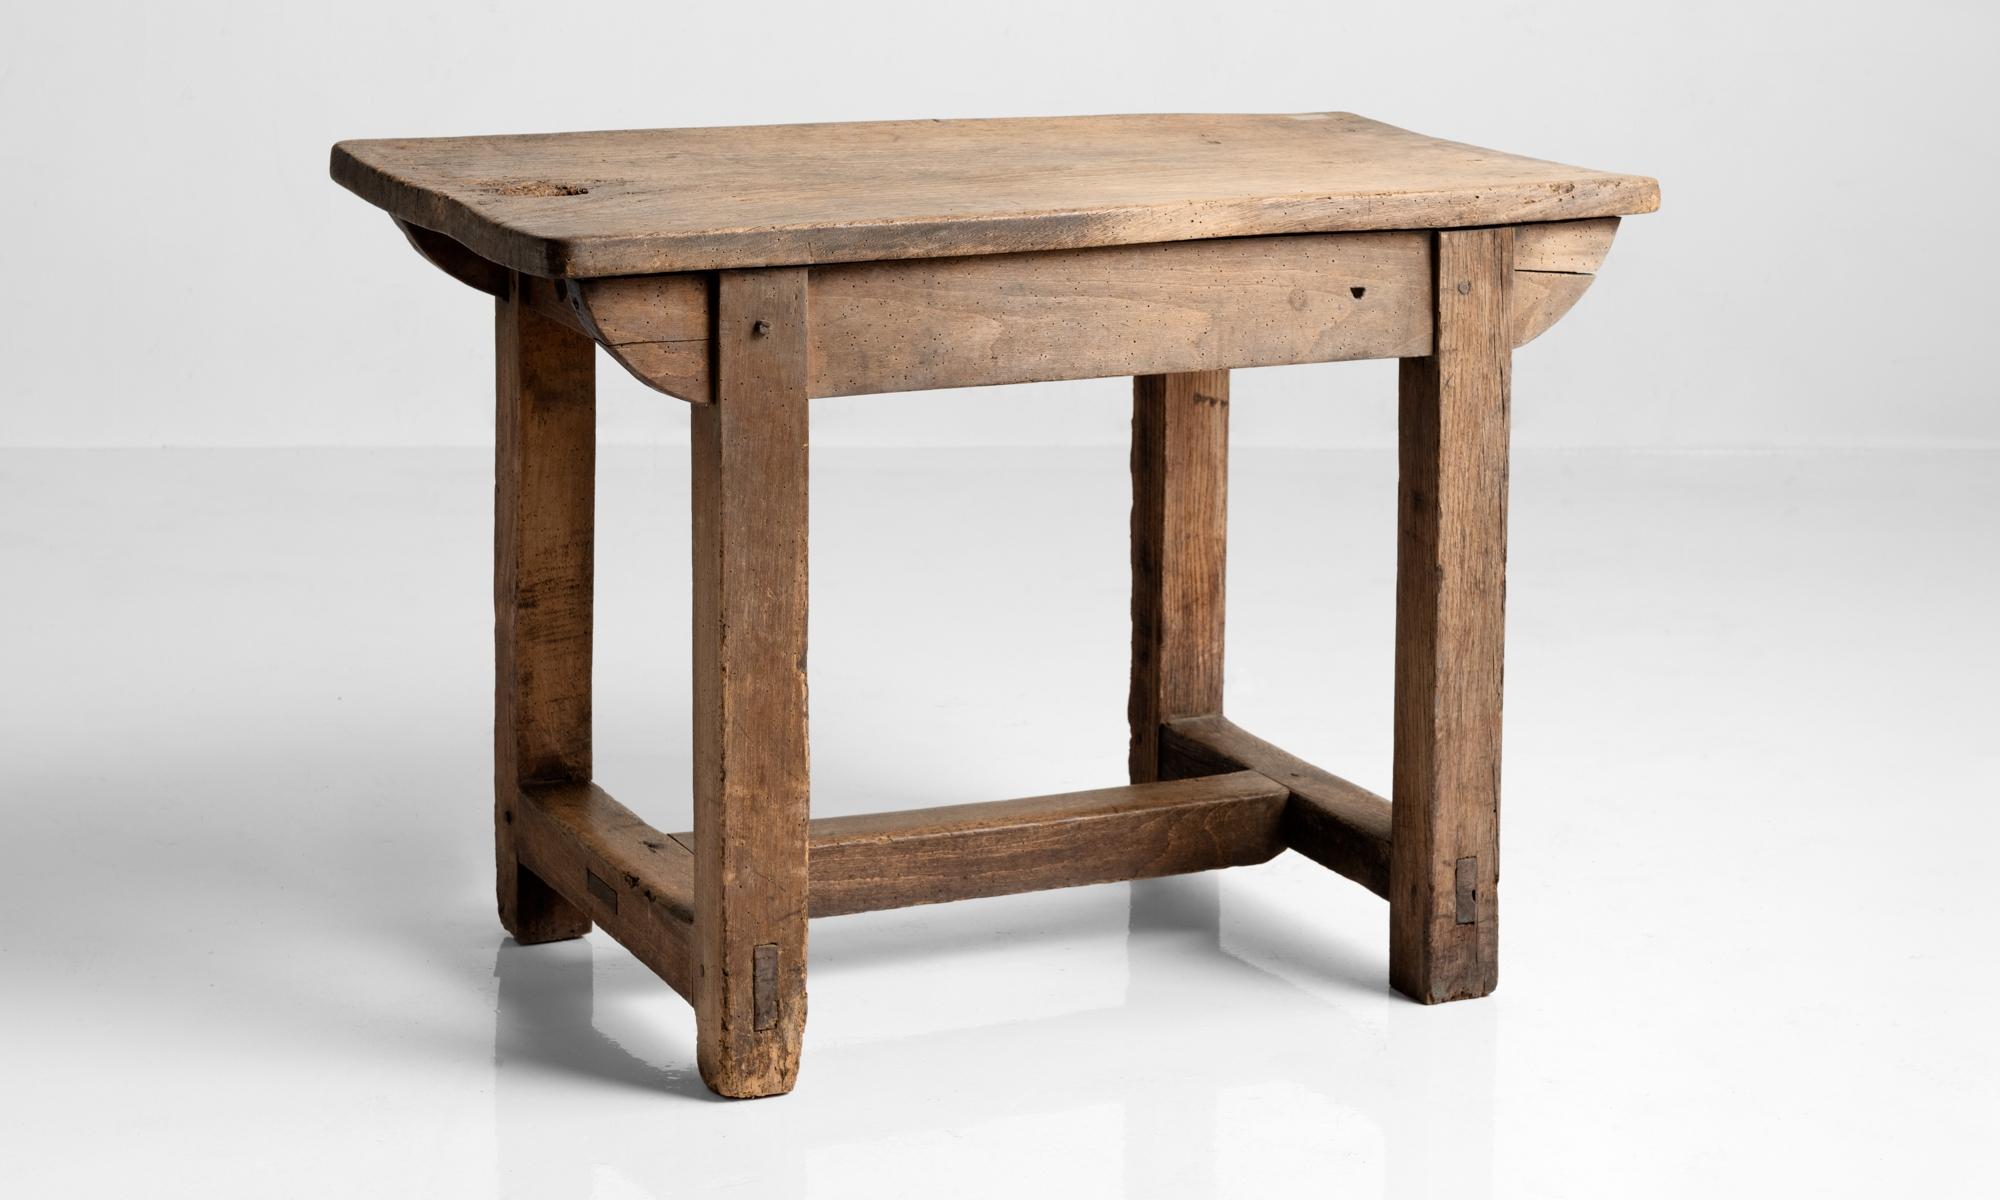 Butcher's Prep table, England, circa 1730.

Simple form with beautiful patina.